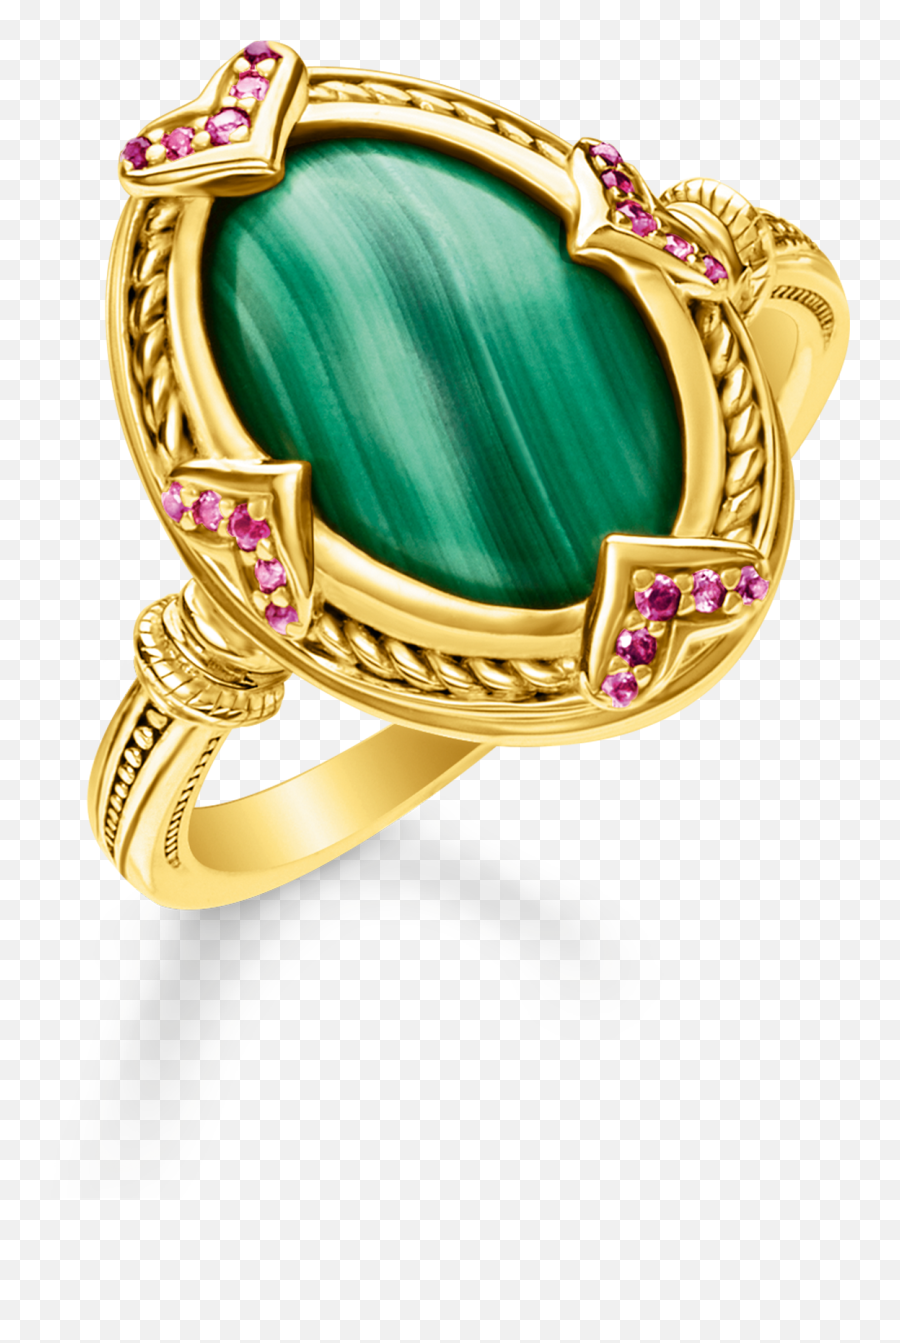 Magic Garden Malachite Jewellery With A Positive Effect On Life - Green Stone Gold Ring Emoji,Ring Emoji Png